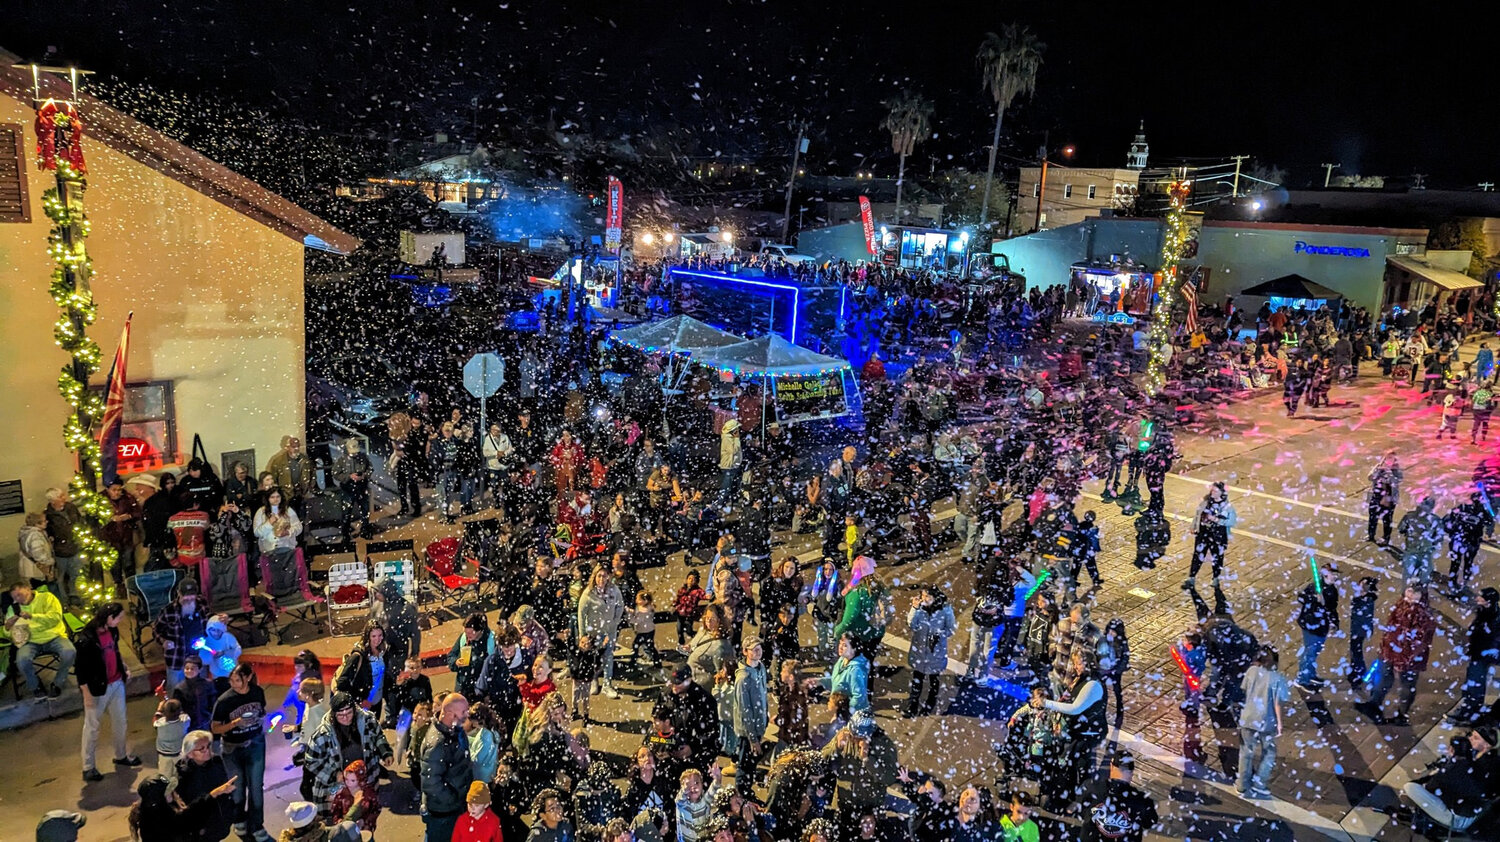 Snow, of the artificial kind, fell on Florence during the Hometown Holiday parade.